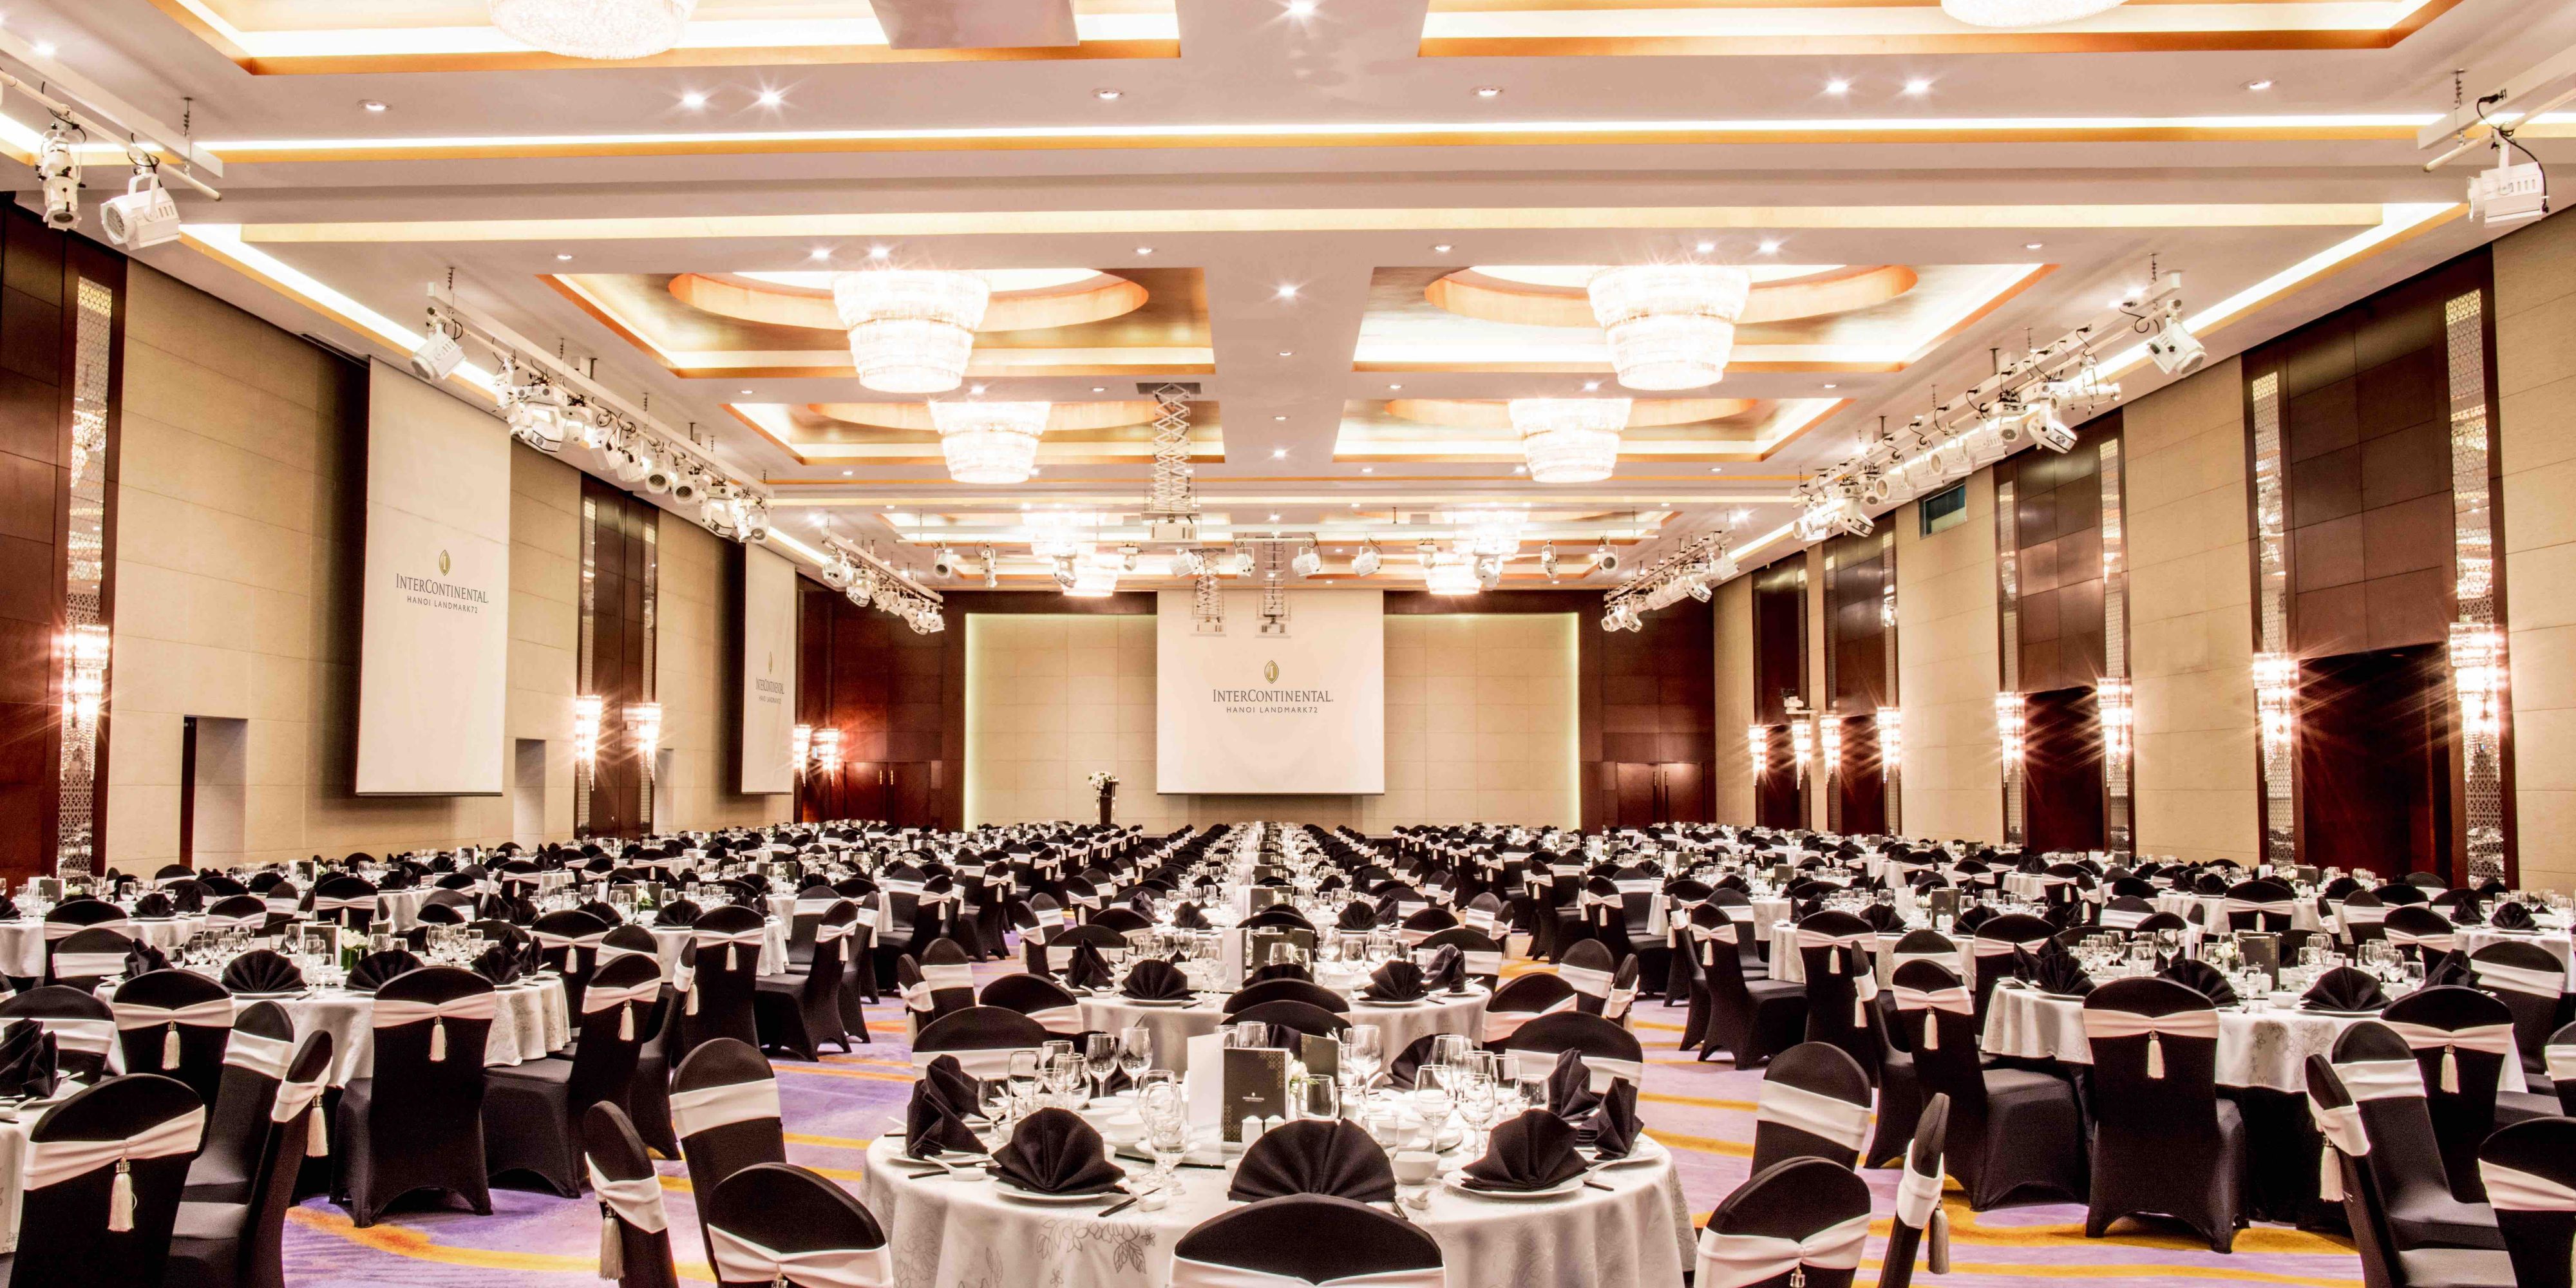 From intimate celebrations to grand conferences, bring your boldest visions to life at the spacious and versatile Convention Centre, featuring modern audiovisual technology. Our Grand Ballroom offers pillar-less space, complemented by a meeting foyer that is one of Hanoi's largest.